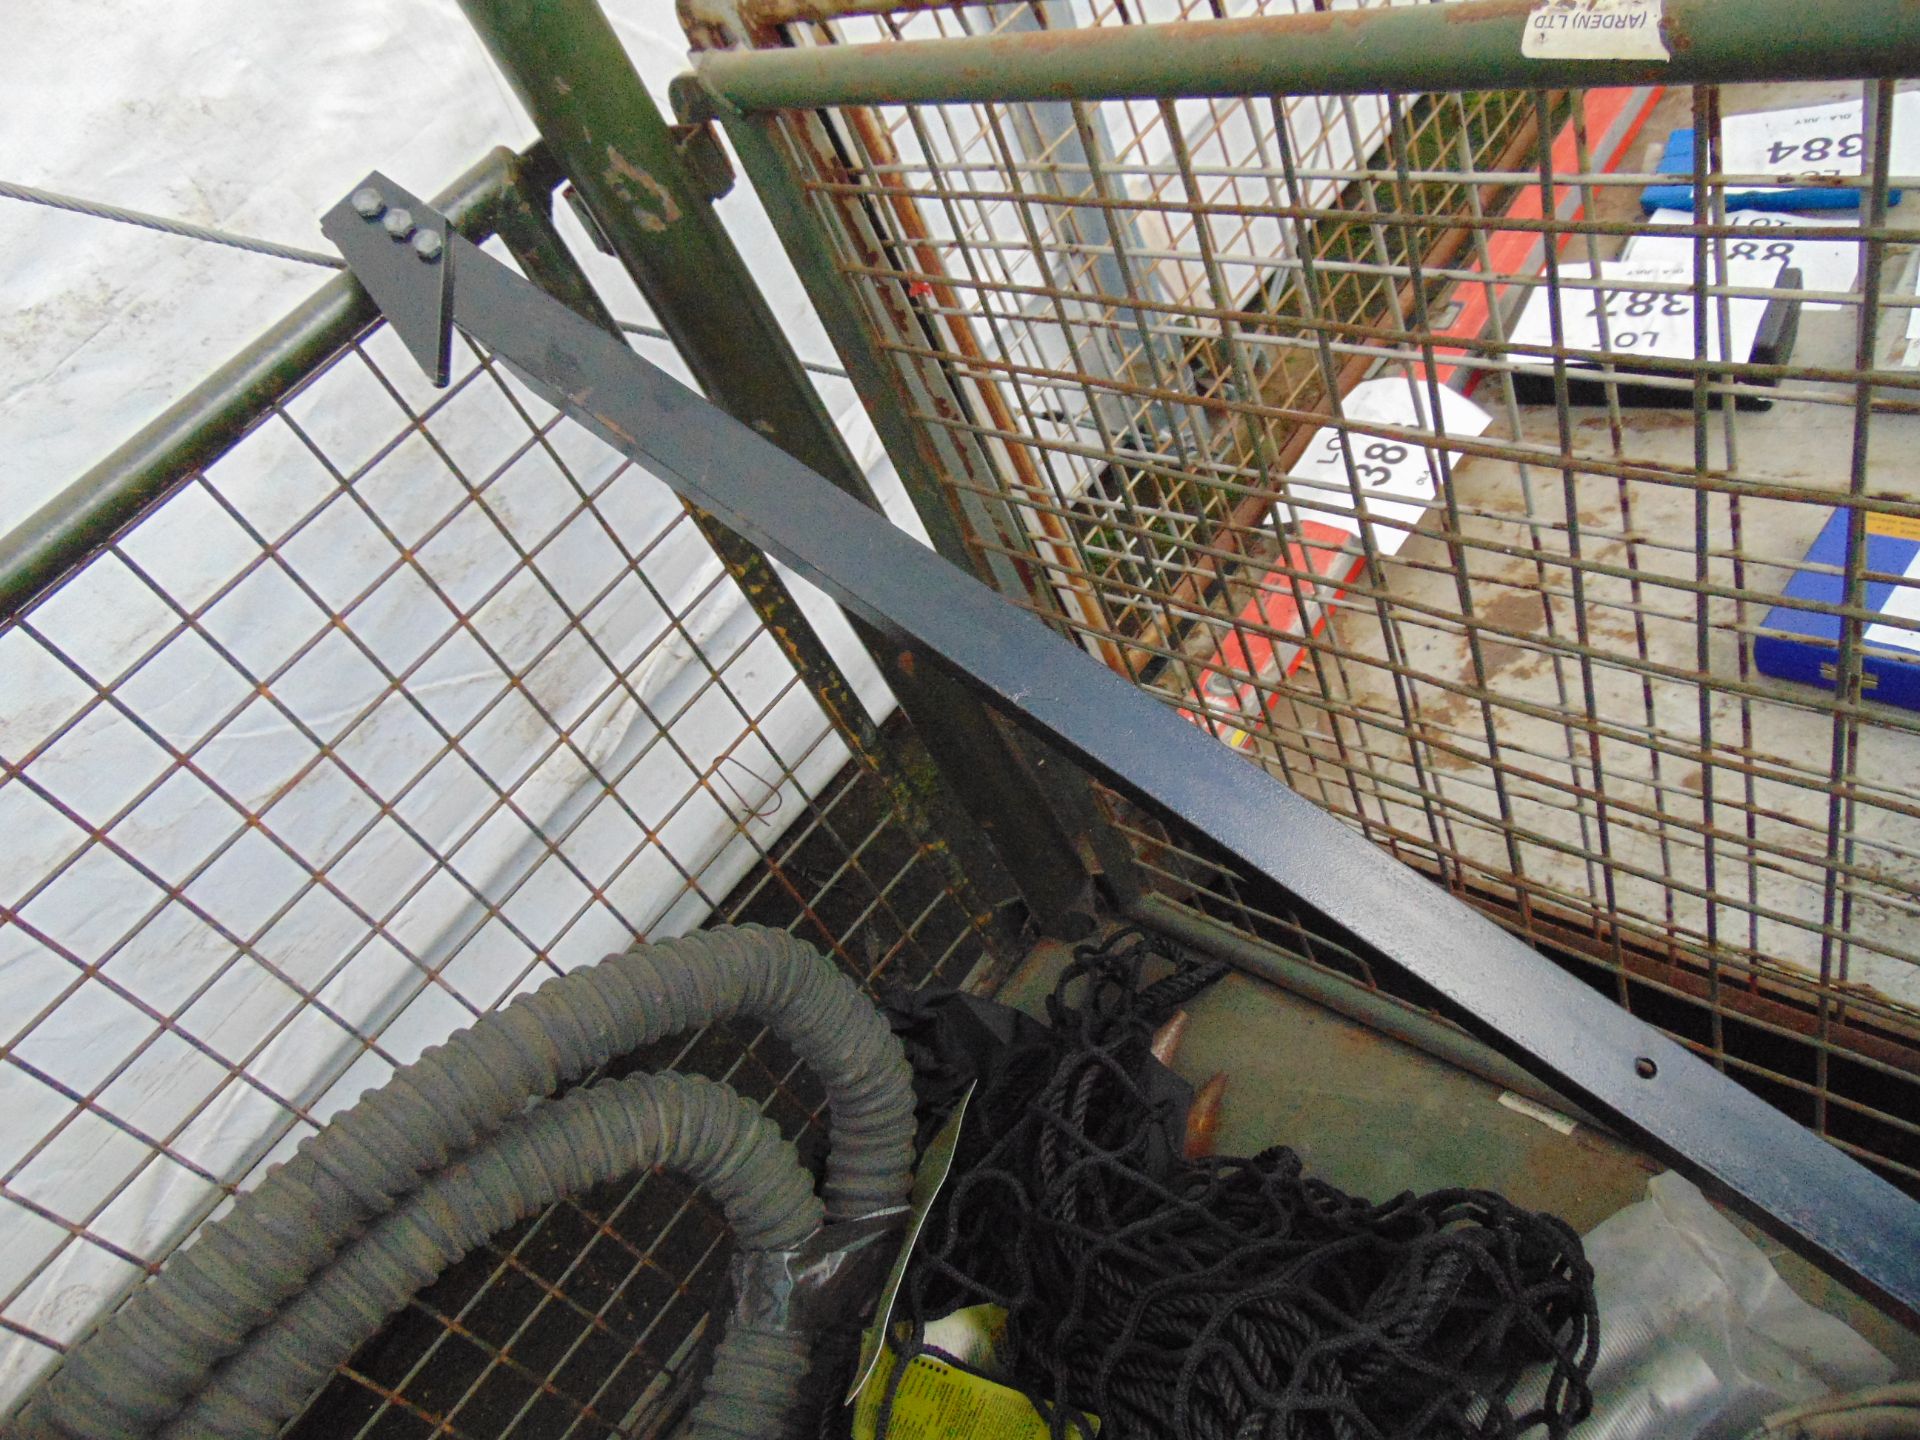 7x Land Rover Wolf Towing/ Recovery Straps, Cargo Net, Snatch Barbed Wire Cutter etc - Image 4 of 6